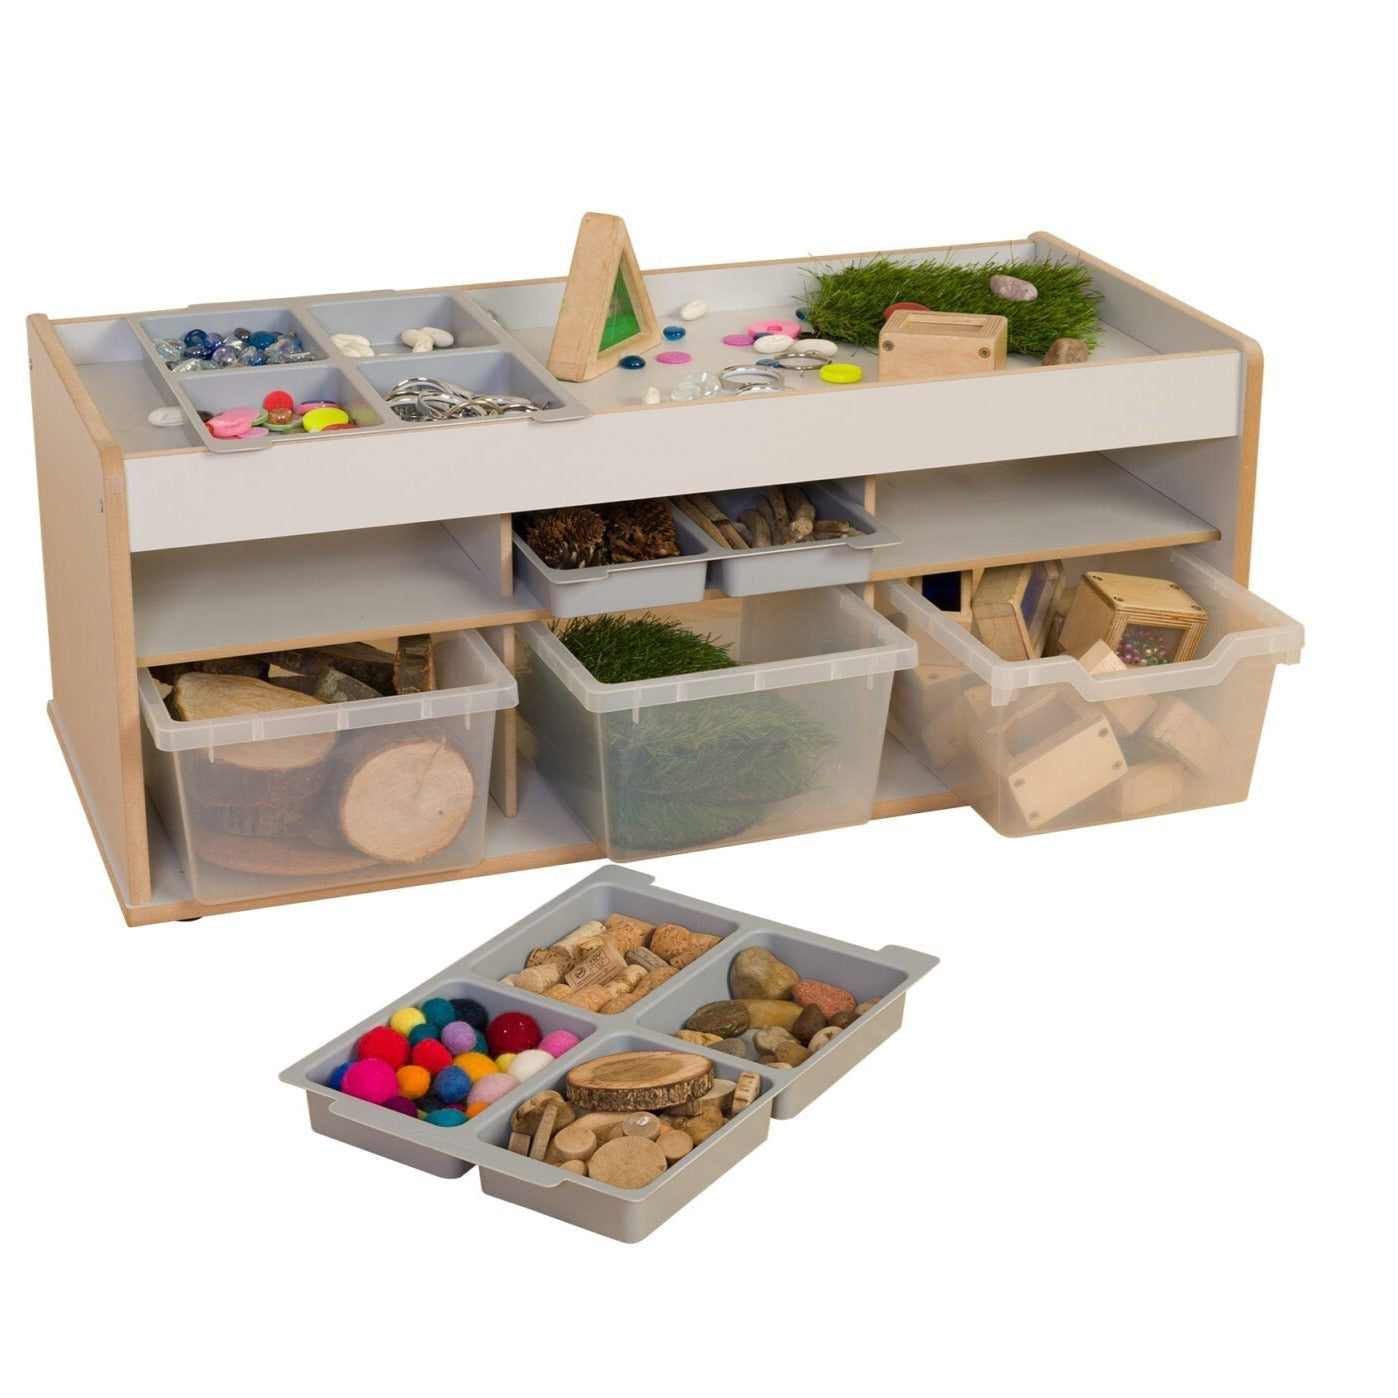 Loose Parts Play & Store Table, The Loose Parts Play & Store Table is a unique storage solution and play surface combination which offers maximum versatility for sorting and organising maths, loose parts, small world and transient art resources. Loose Parts Play & Store Table 15mm Covered MDF – ISO 22196 certified antibacterial. Supplied with 3 storage trays with compartments. Storage underneath for trays when not in use. Supplied in flat pack form with easy to follow assembly instructions. Dimensions 898 ×